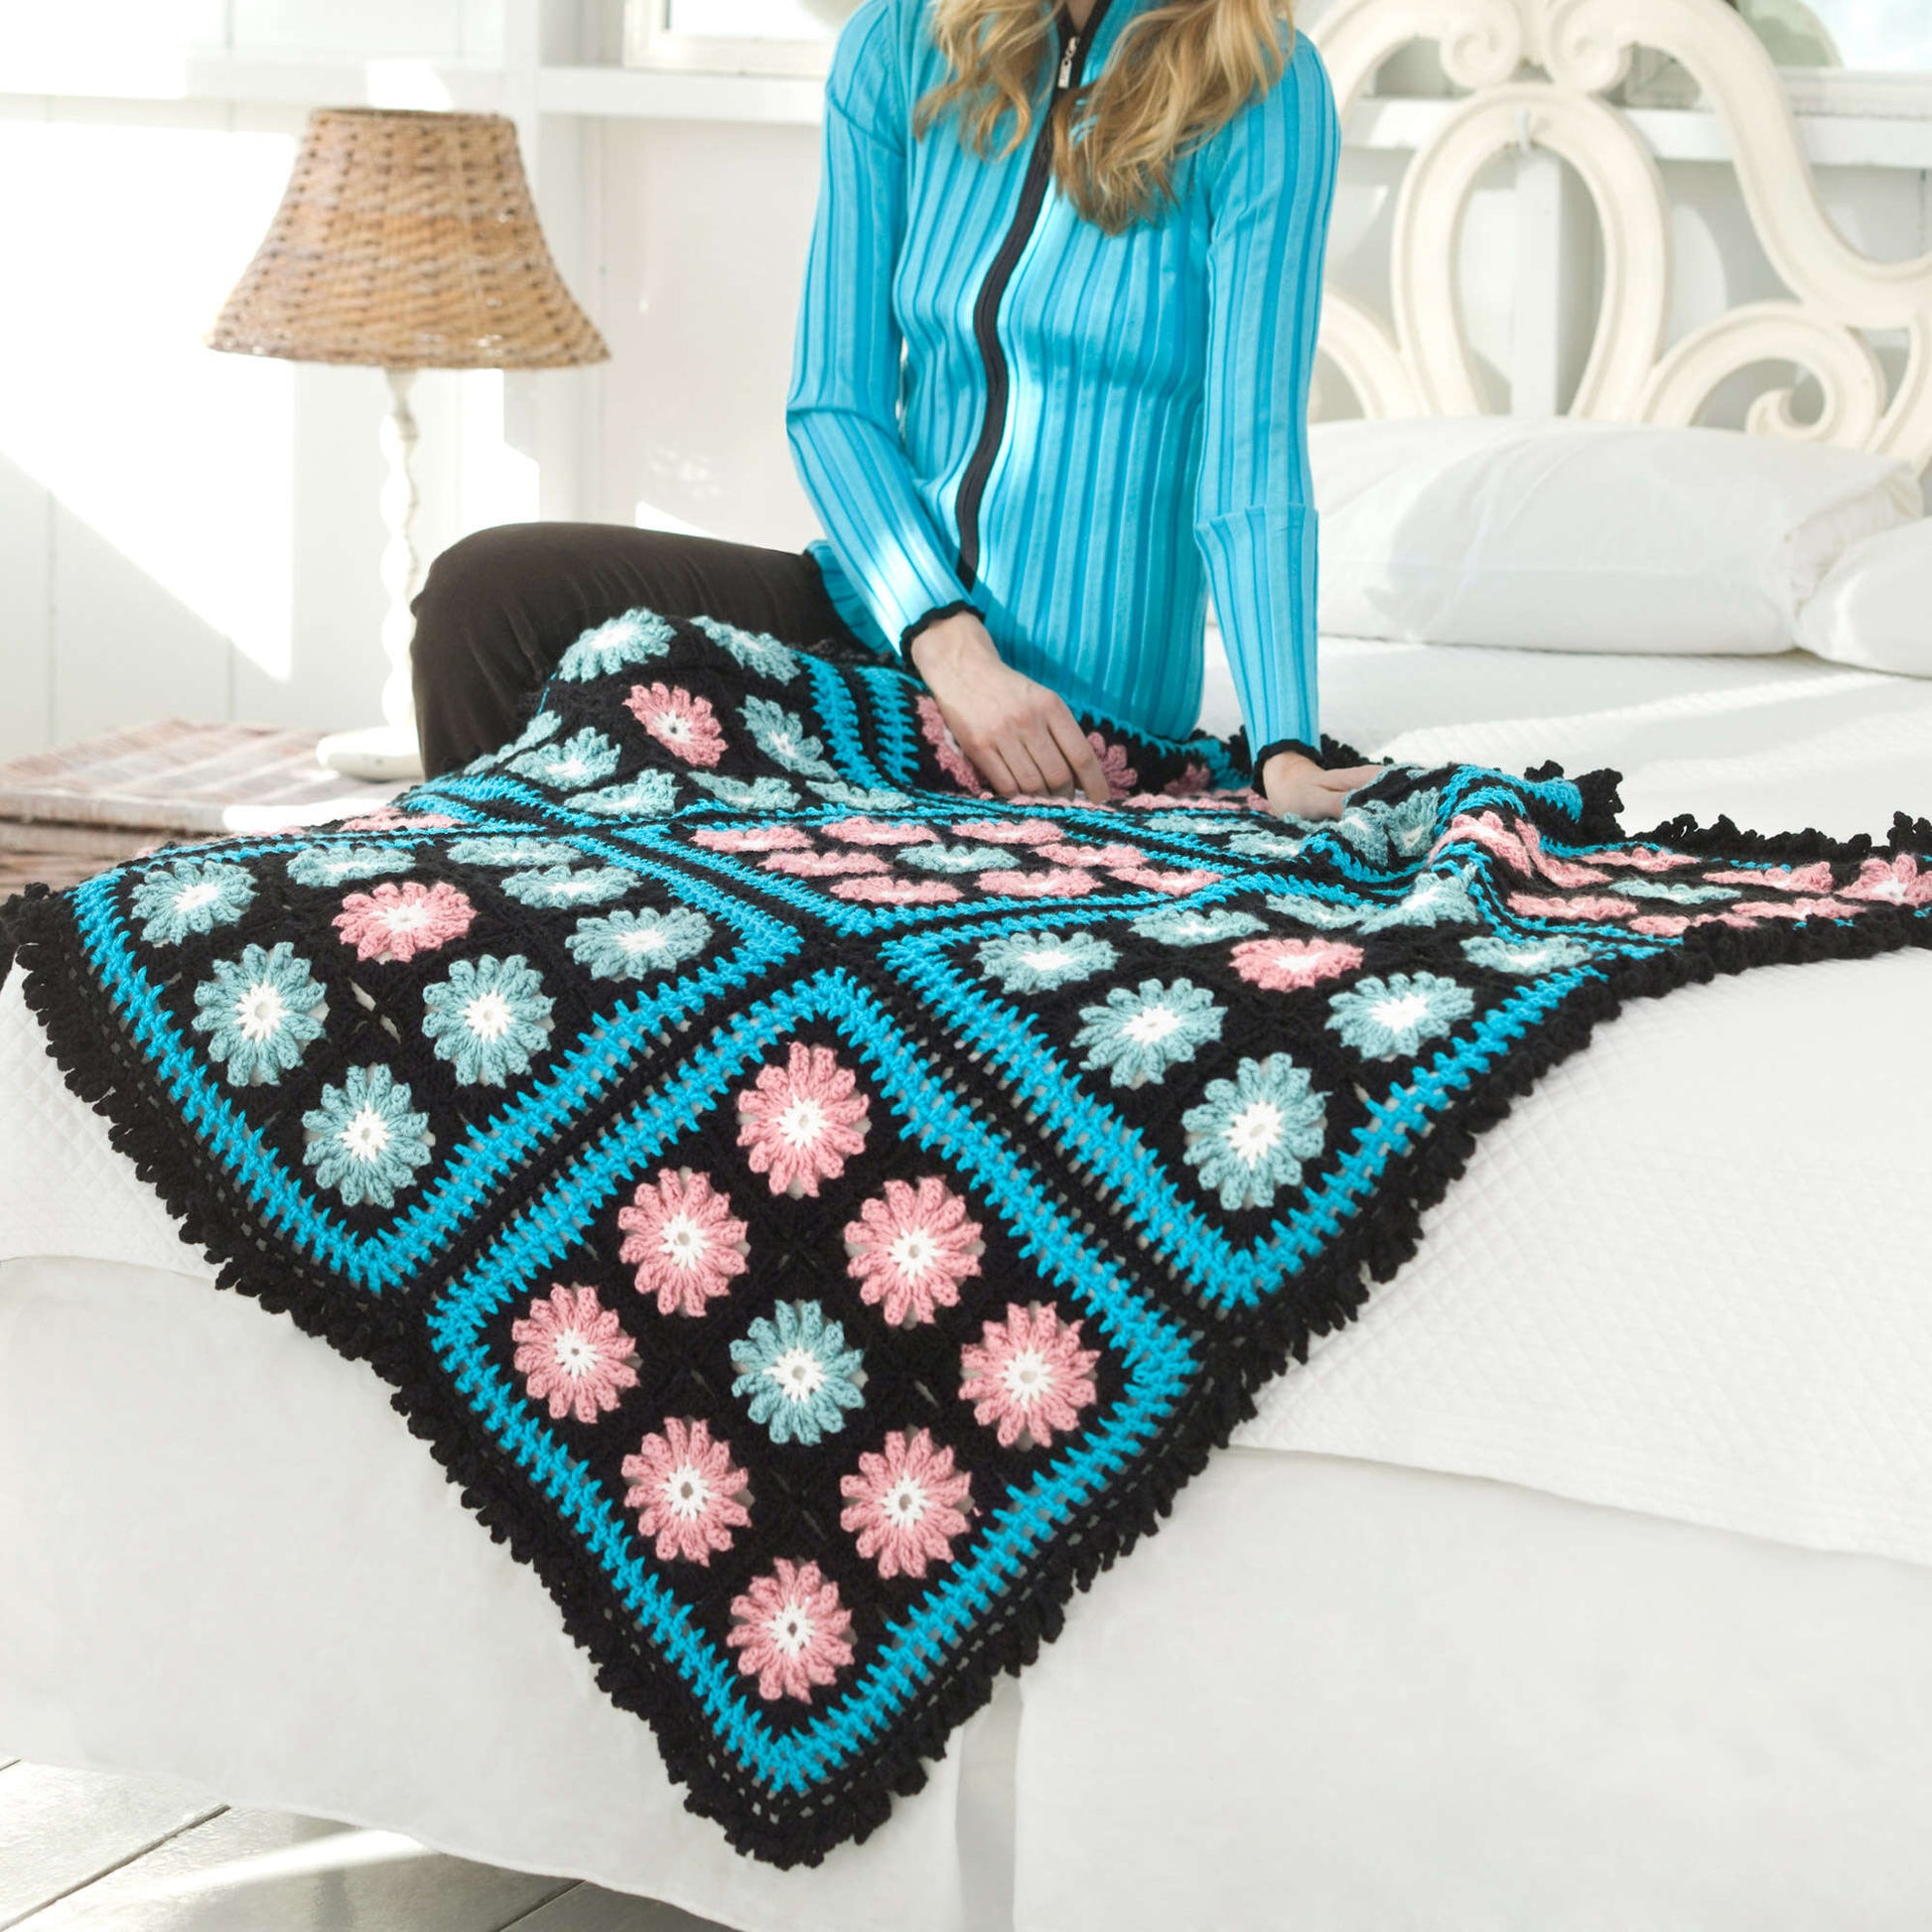 Free Red Heart Flower Accents Throw Crochet Pattern